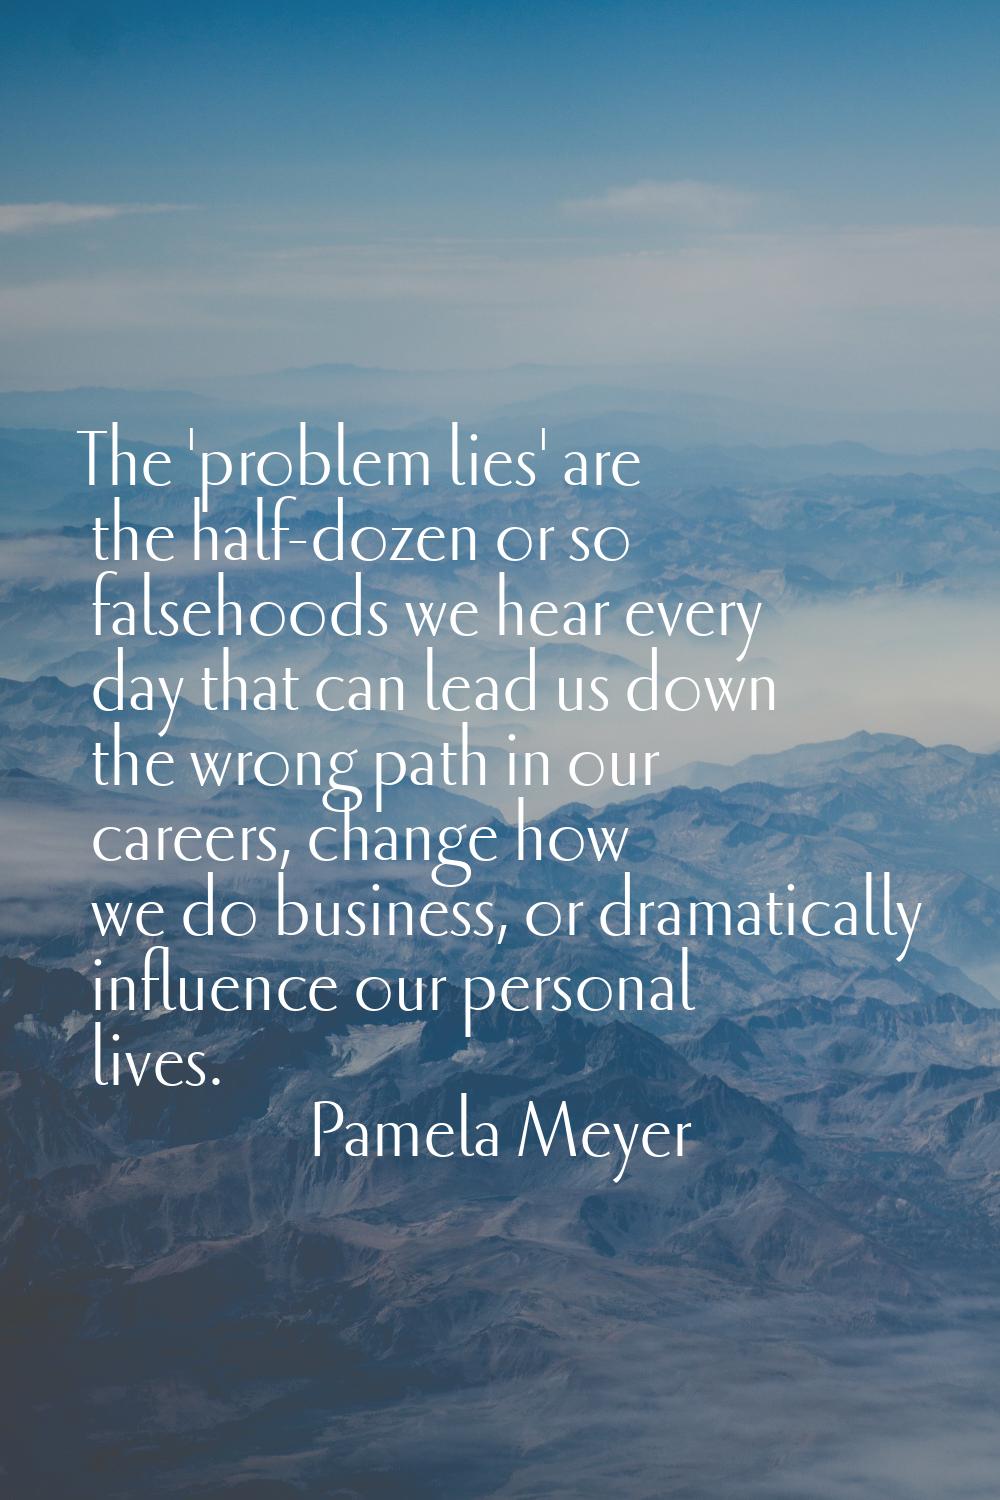 The 'problem lies' are the half-dozen or so falsehoods we hear every day that can lead us down the 